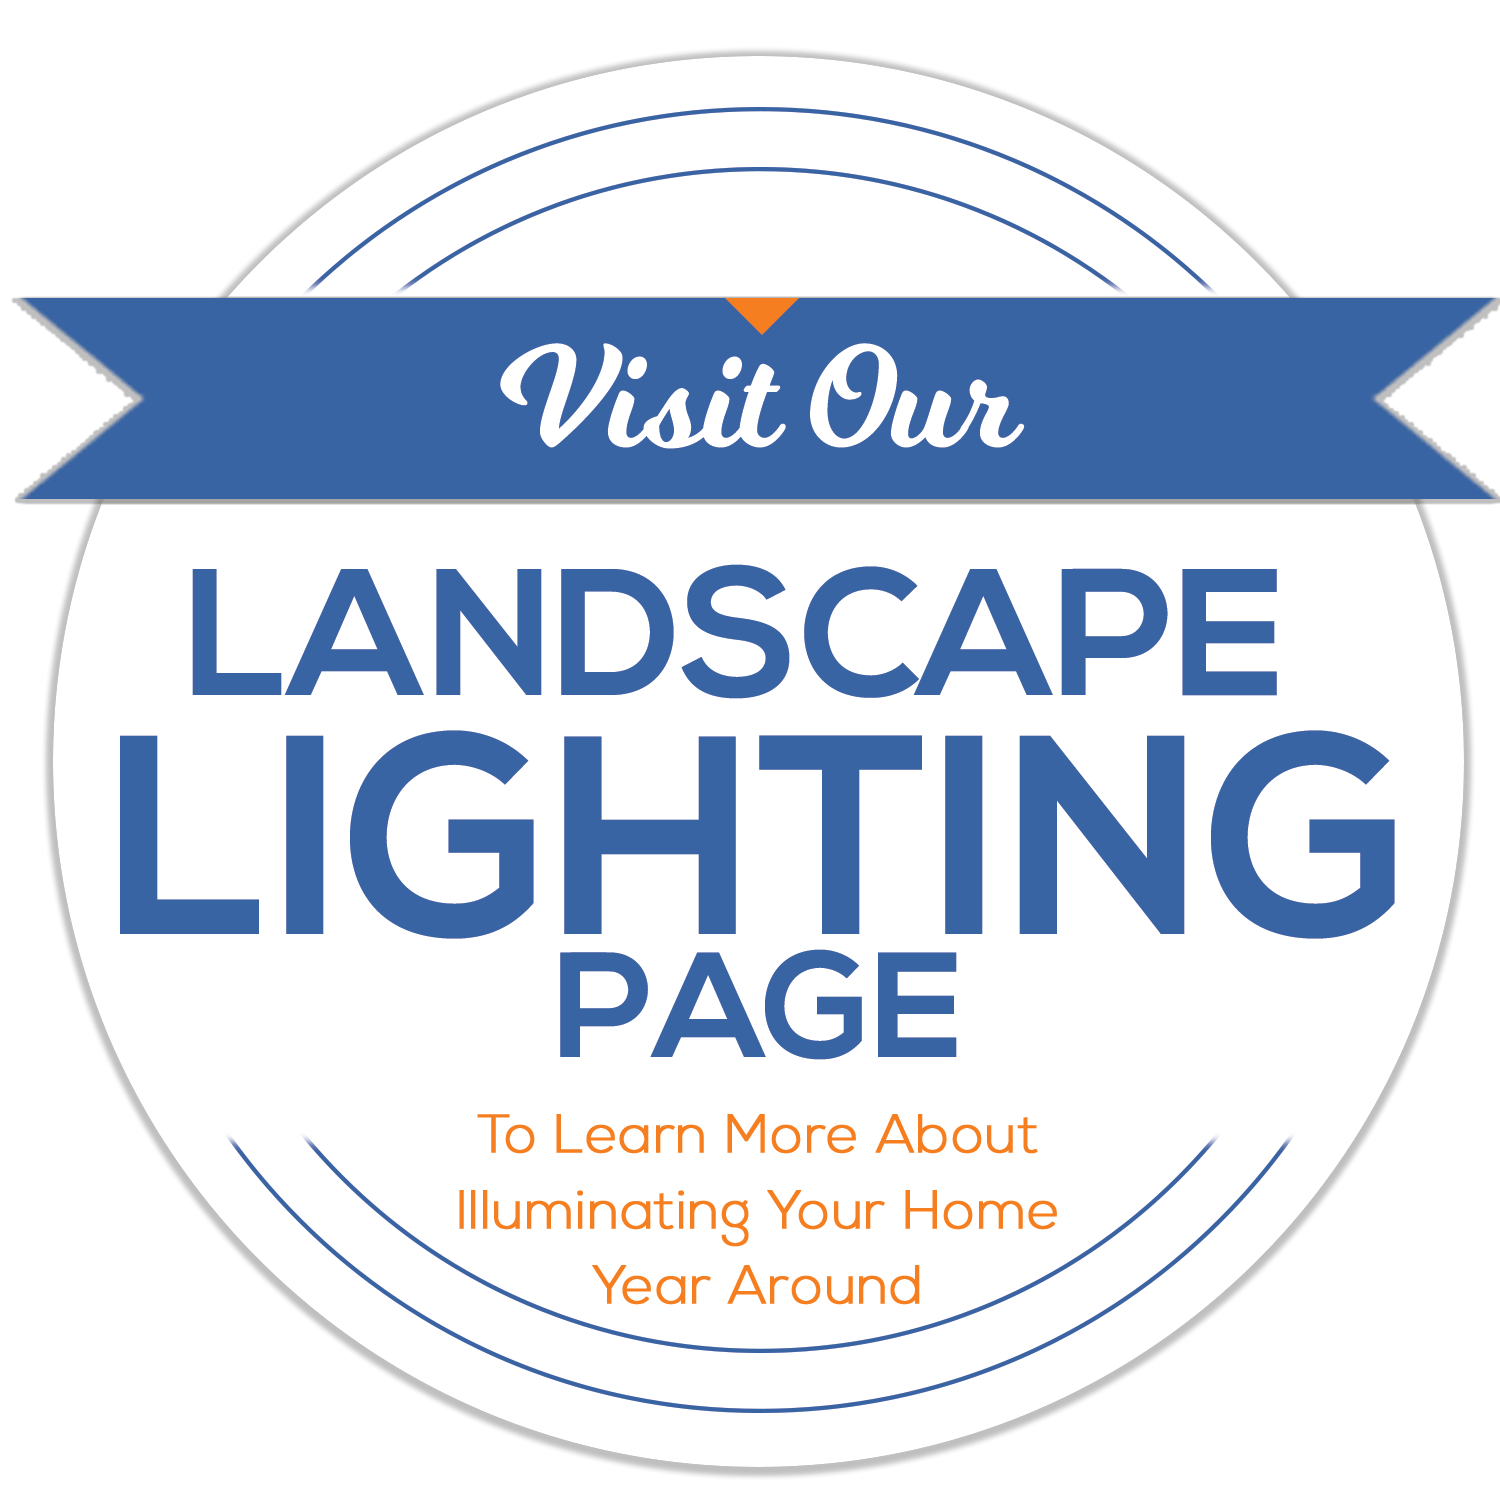 Visit our landscape lighting page to learn more about illuminating your home year round